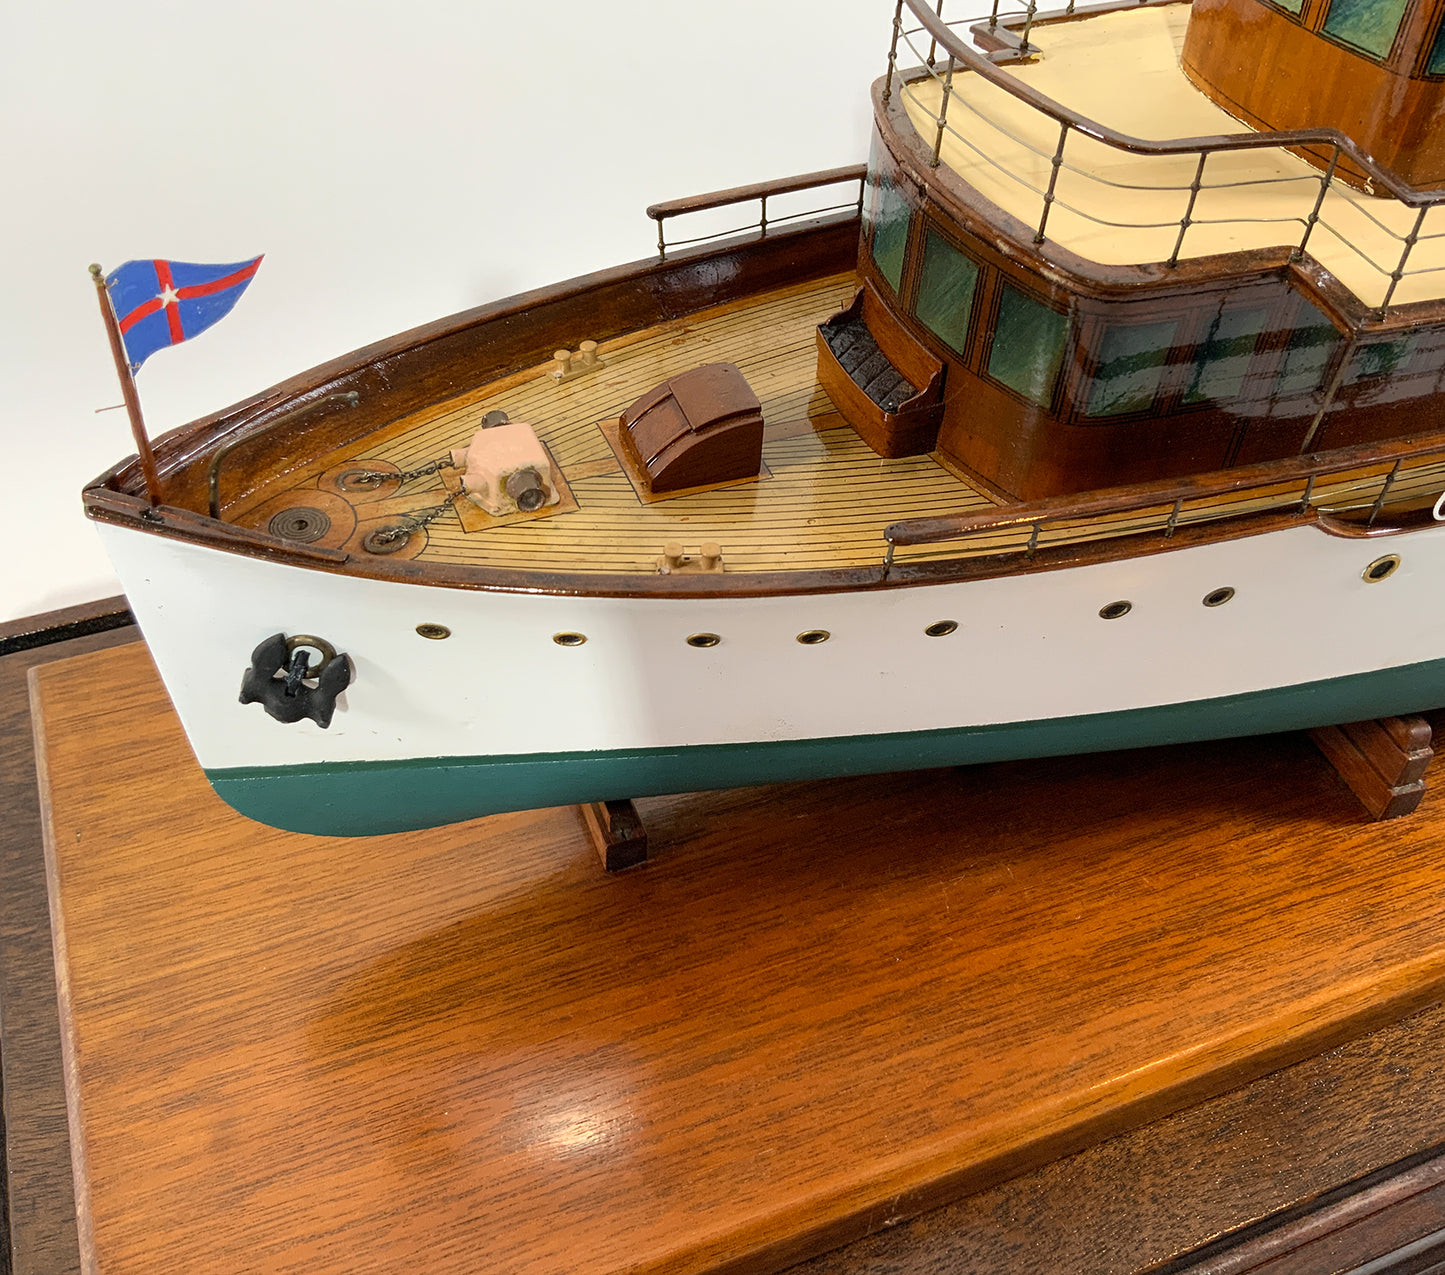 Period Builders Model Of The Private Yacht "Caritas" - Lannan Gallery